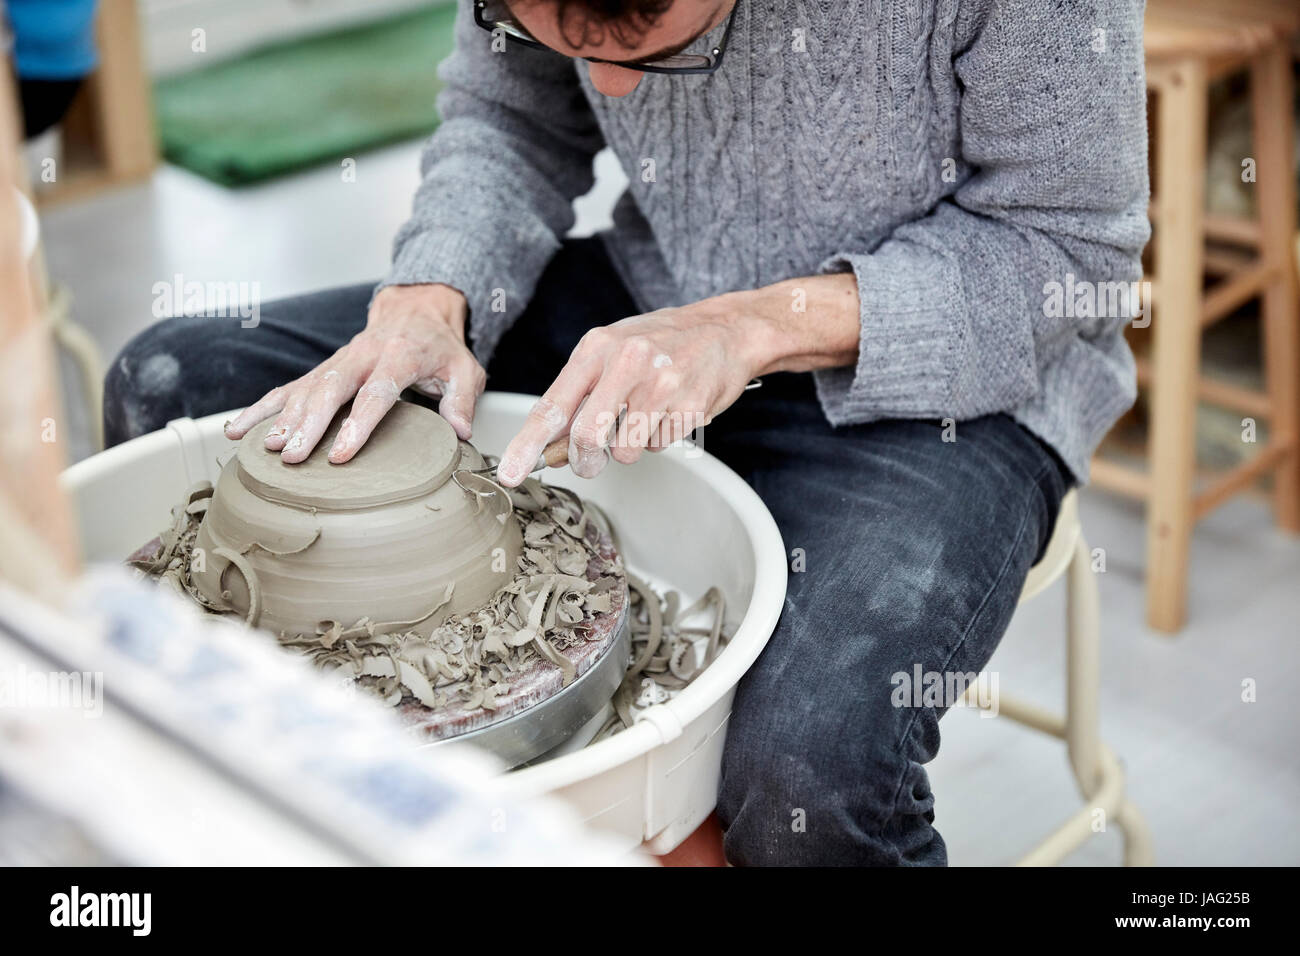 A man using a pottery wheel, shaping a pot base with a small handheld tool shaving off excess clay. Stock Photo